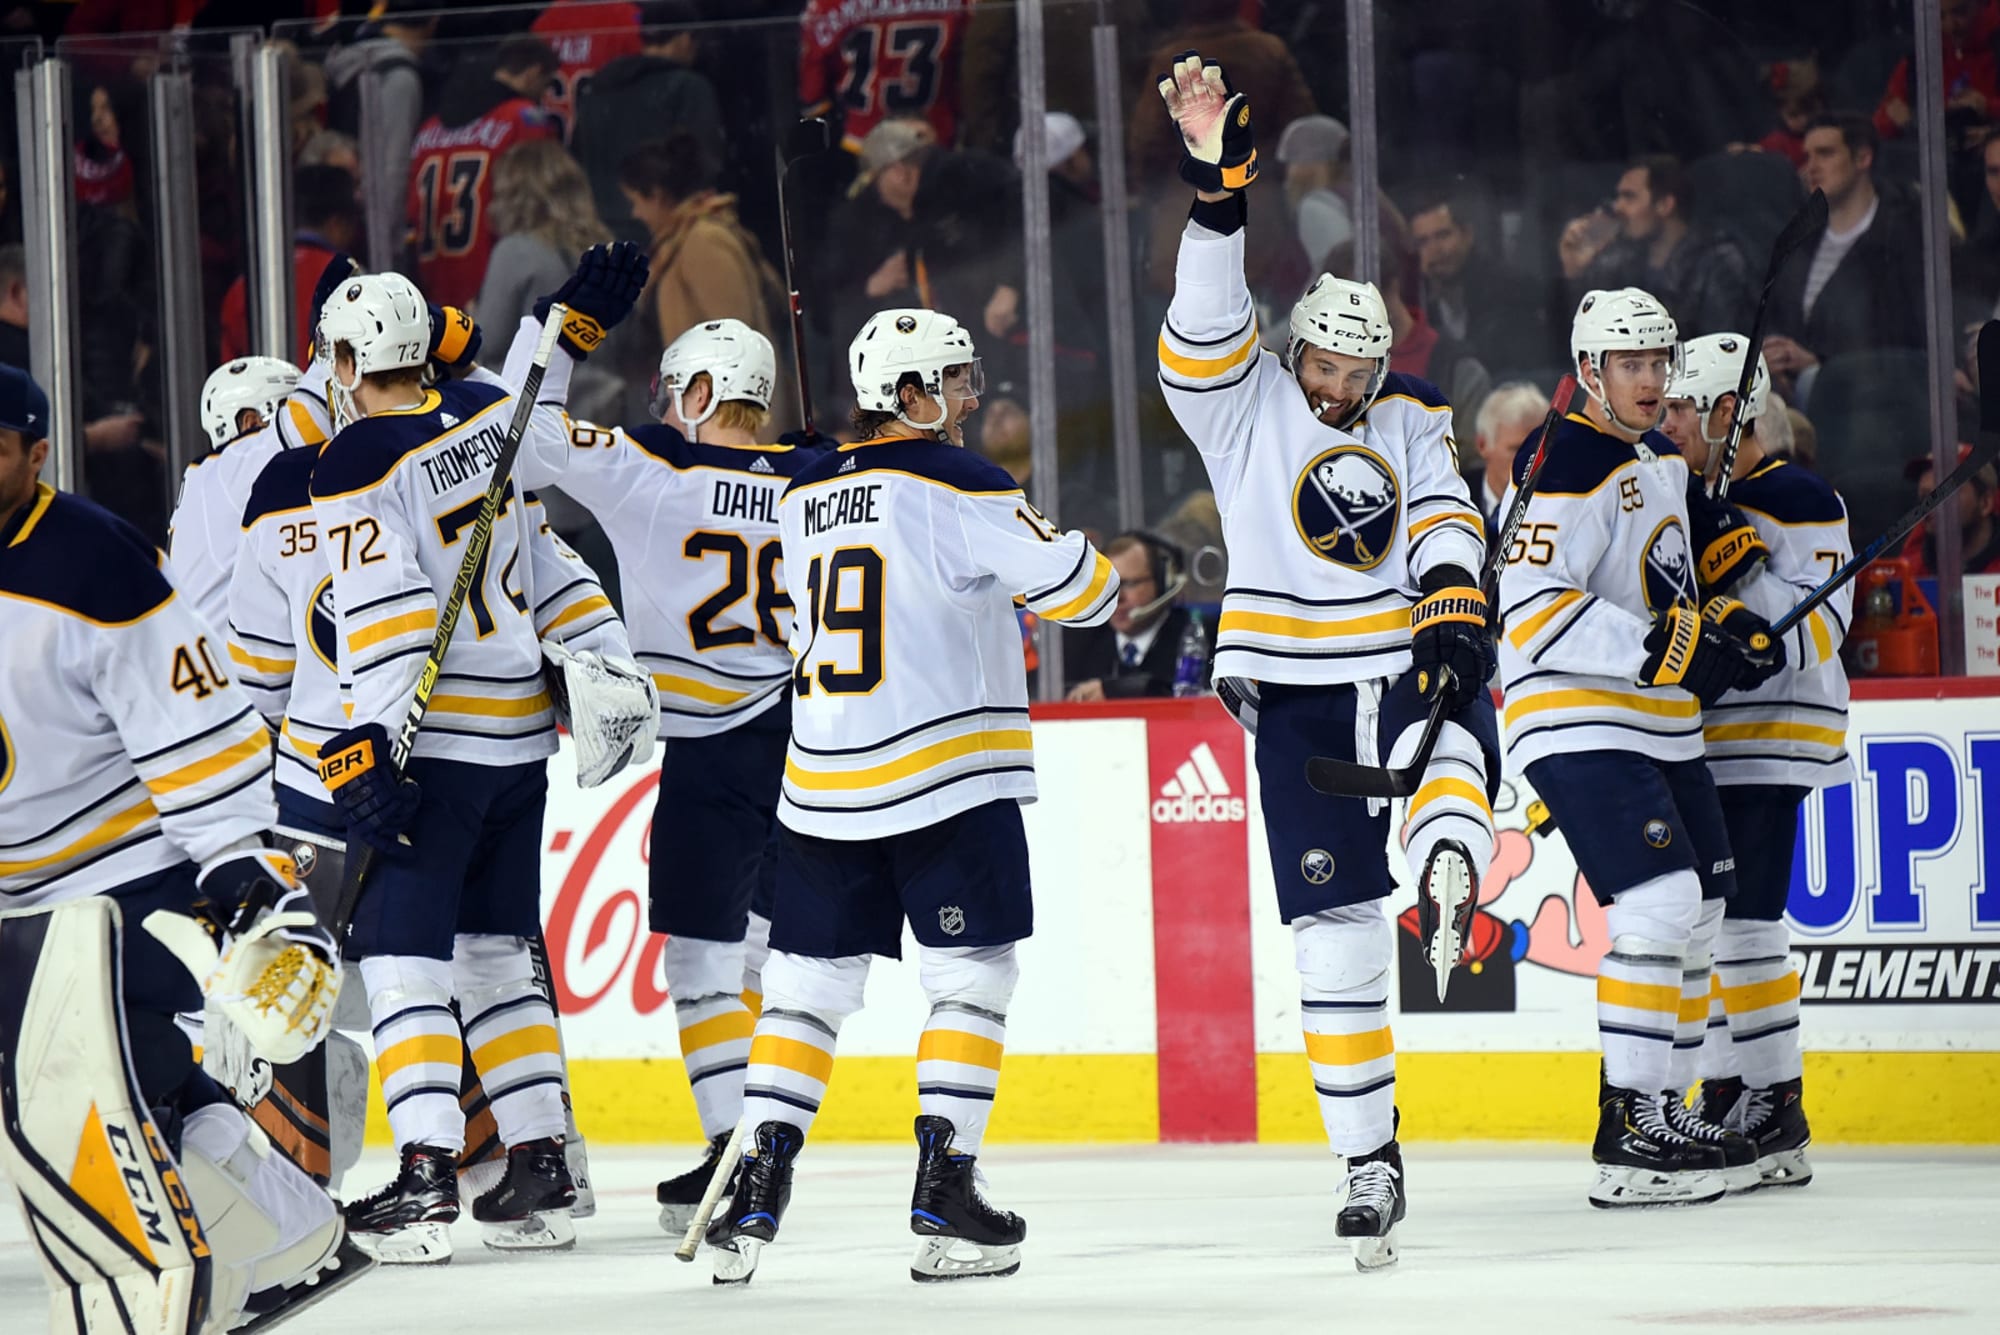 What is the Sabres path to Stanley Cup playoffs?